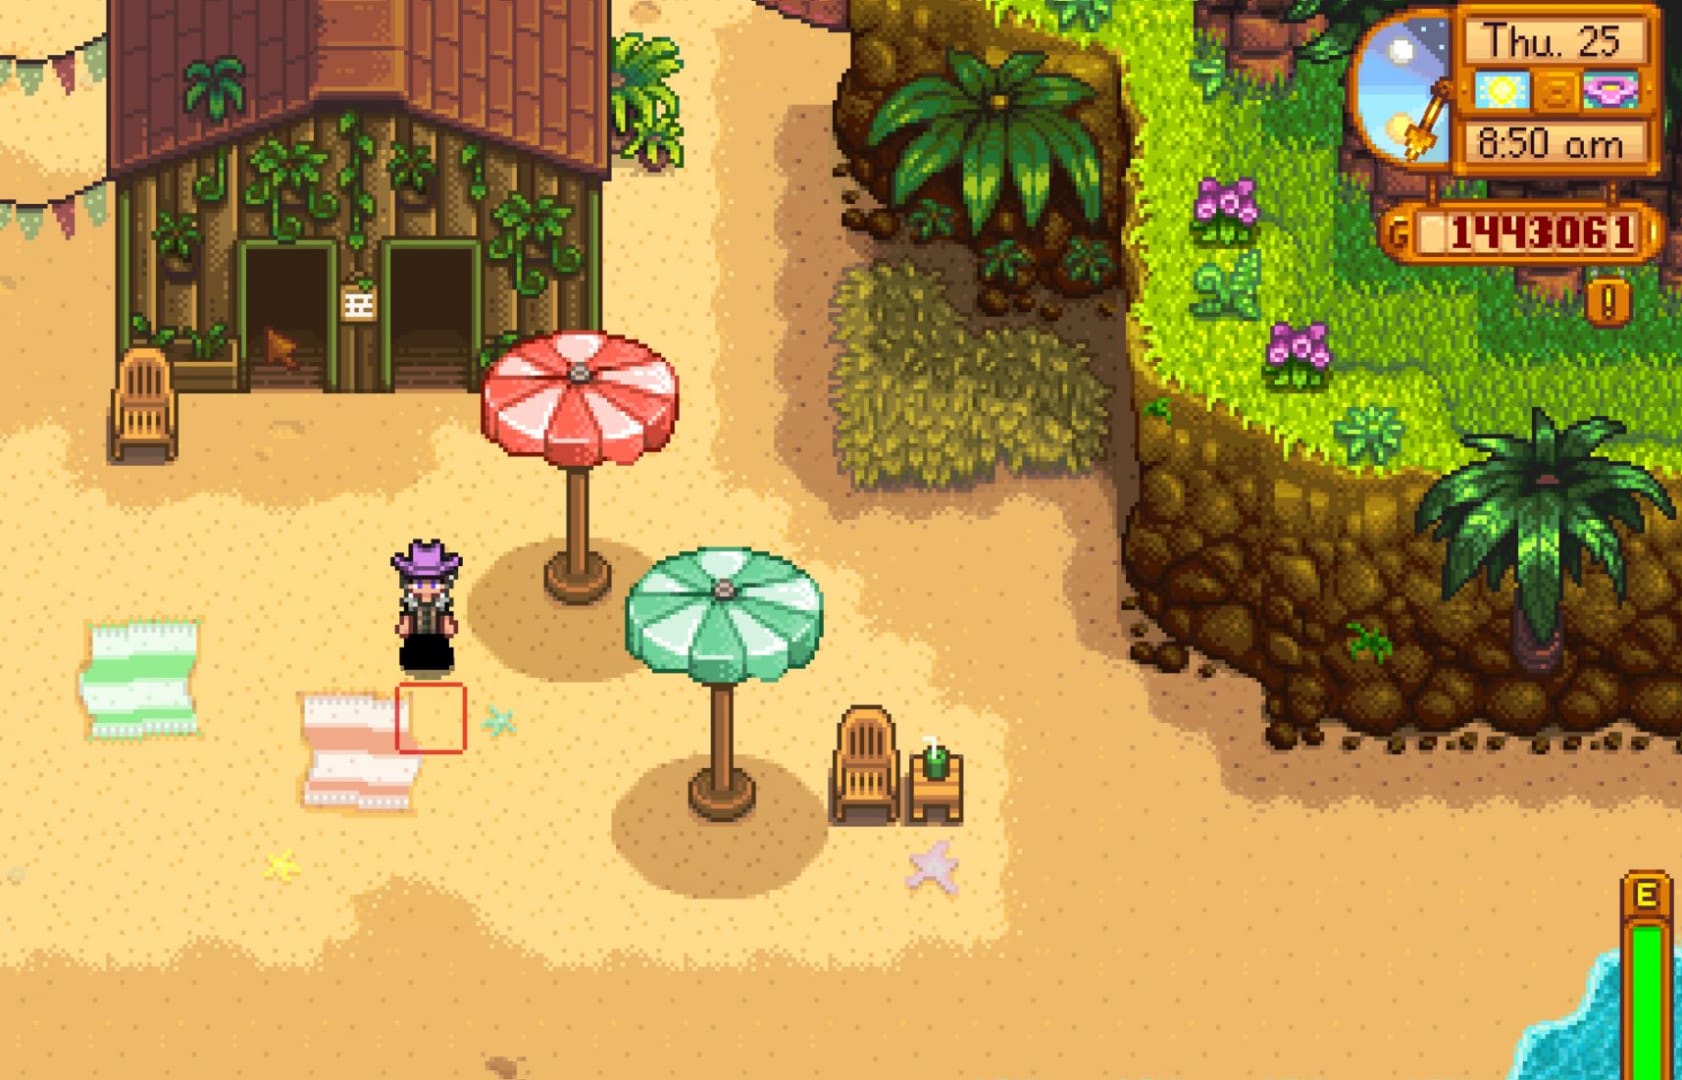 Stardew Valley Mermaid Puzzle on Ginger Island: Solve With Ease